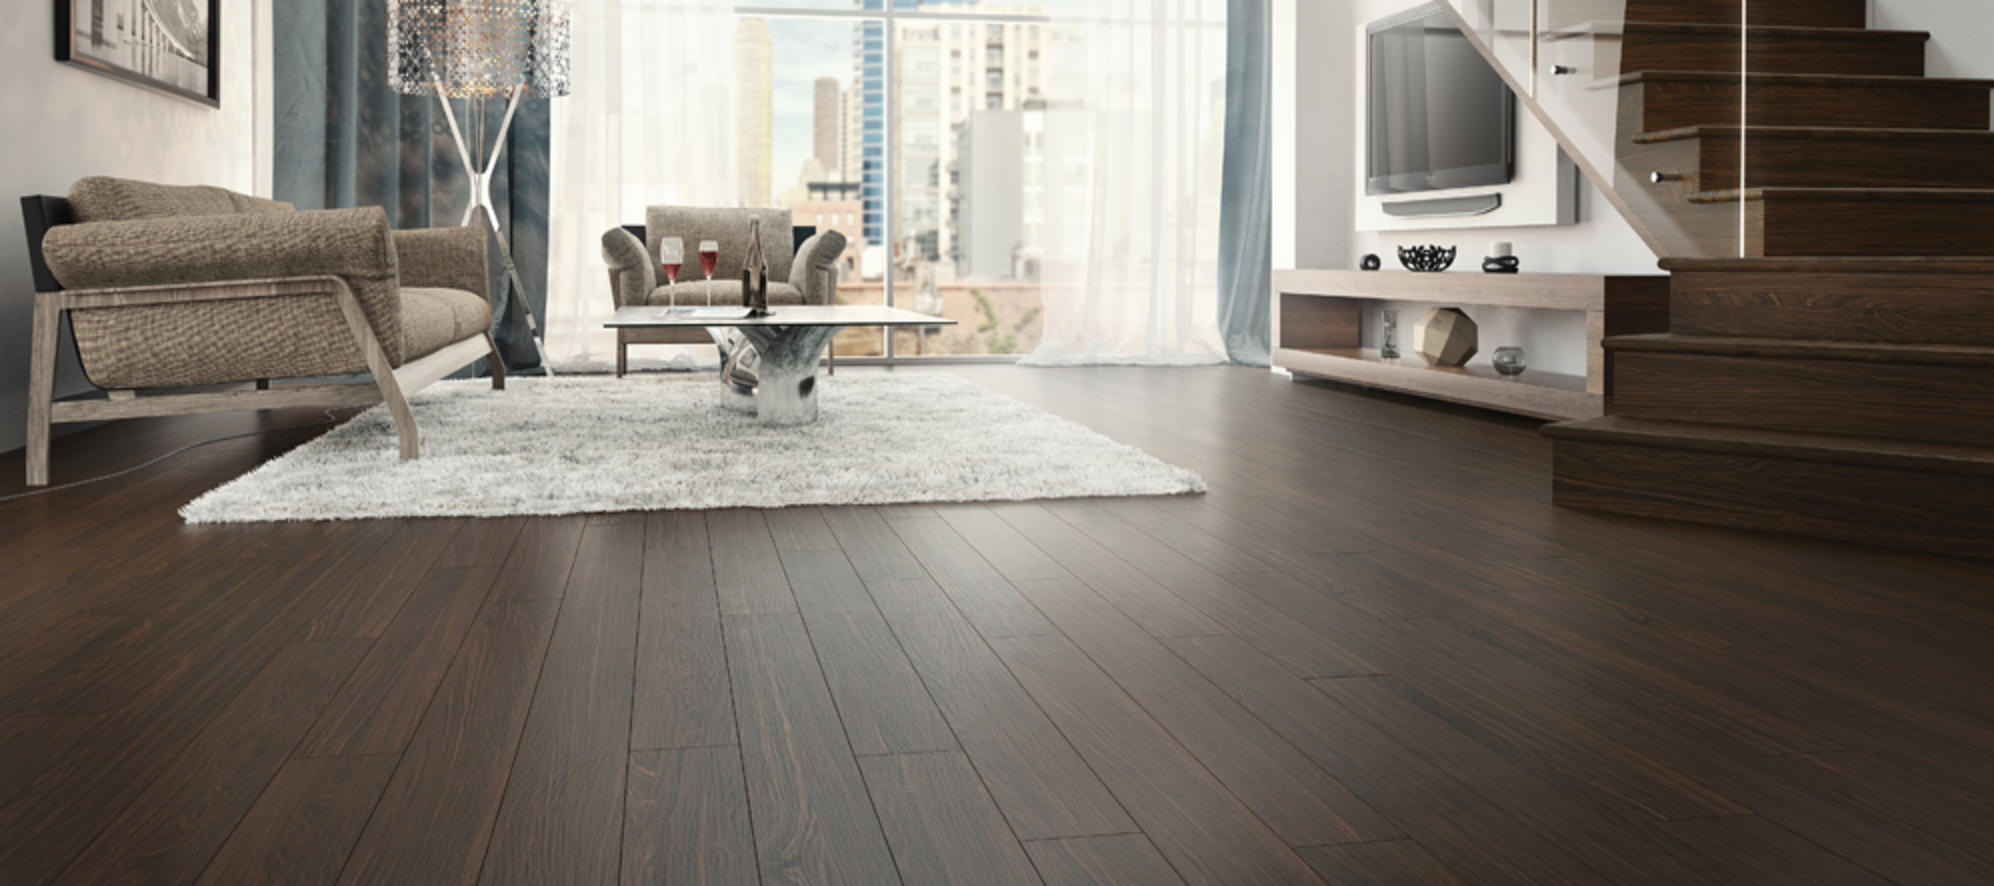 Friday Family-Friendly Find: Torlys EverWood LVT | Interiors for Families